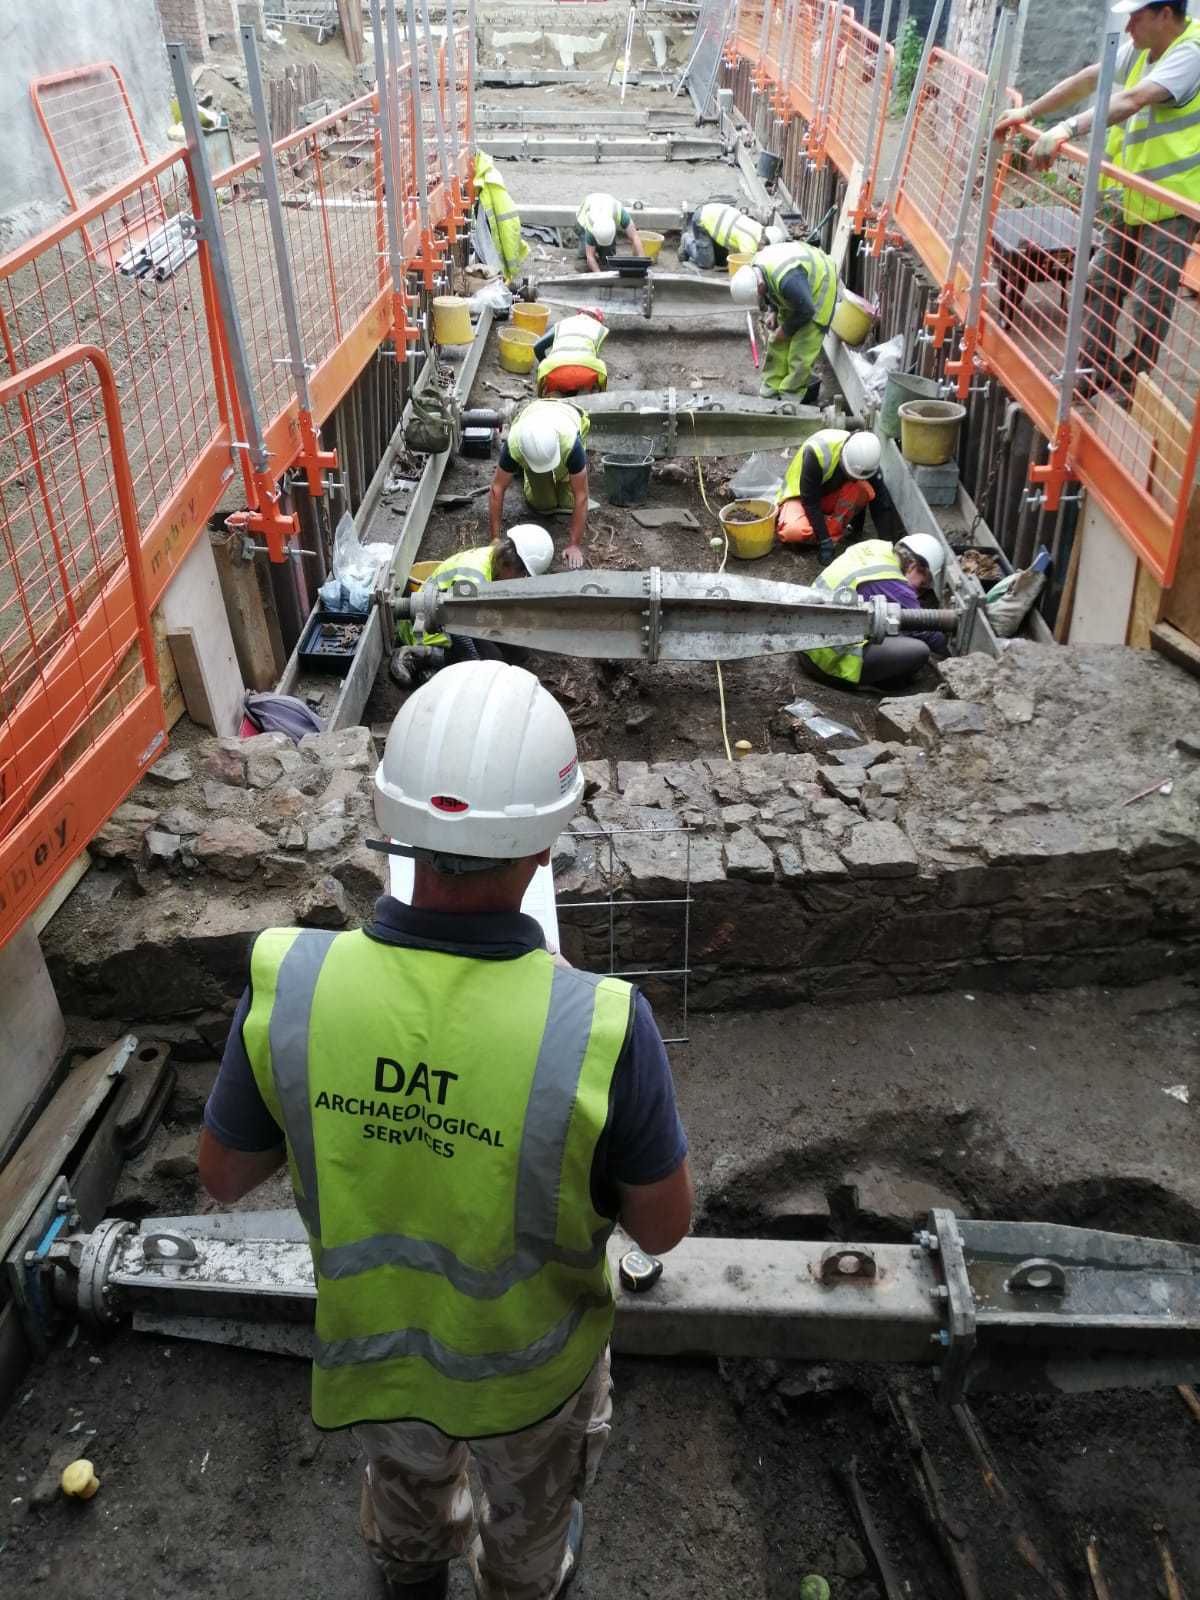 The medieval friary - dating back more than 600 years - was unearthed by builders digging foundations for a new bar. (Wales News)